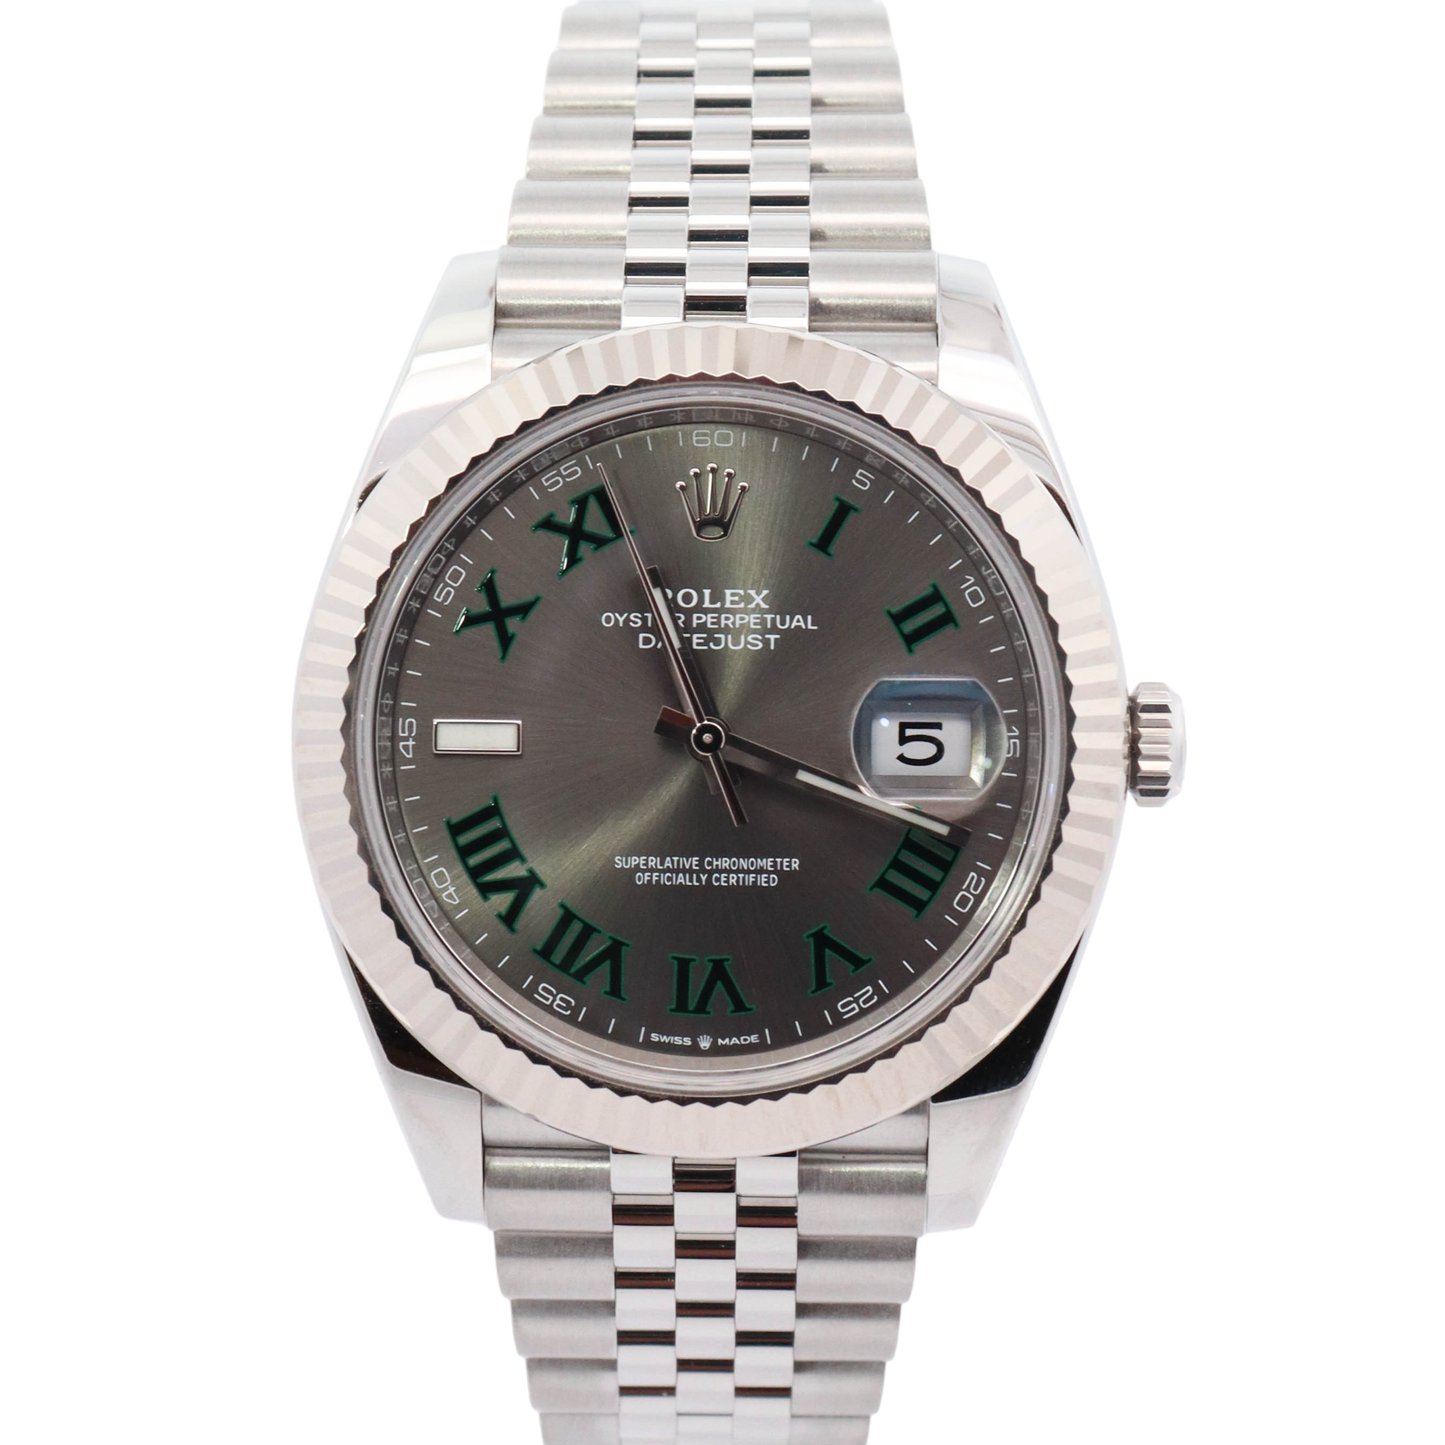 Rolex Datejust 41mm Stainless Steel Slate Grey Roman Dial Watch Reference #: 126334